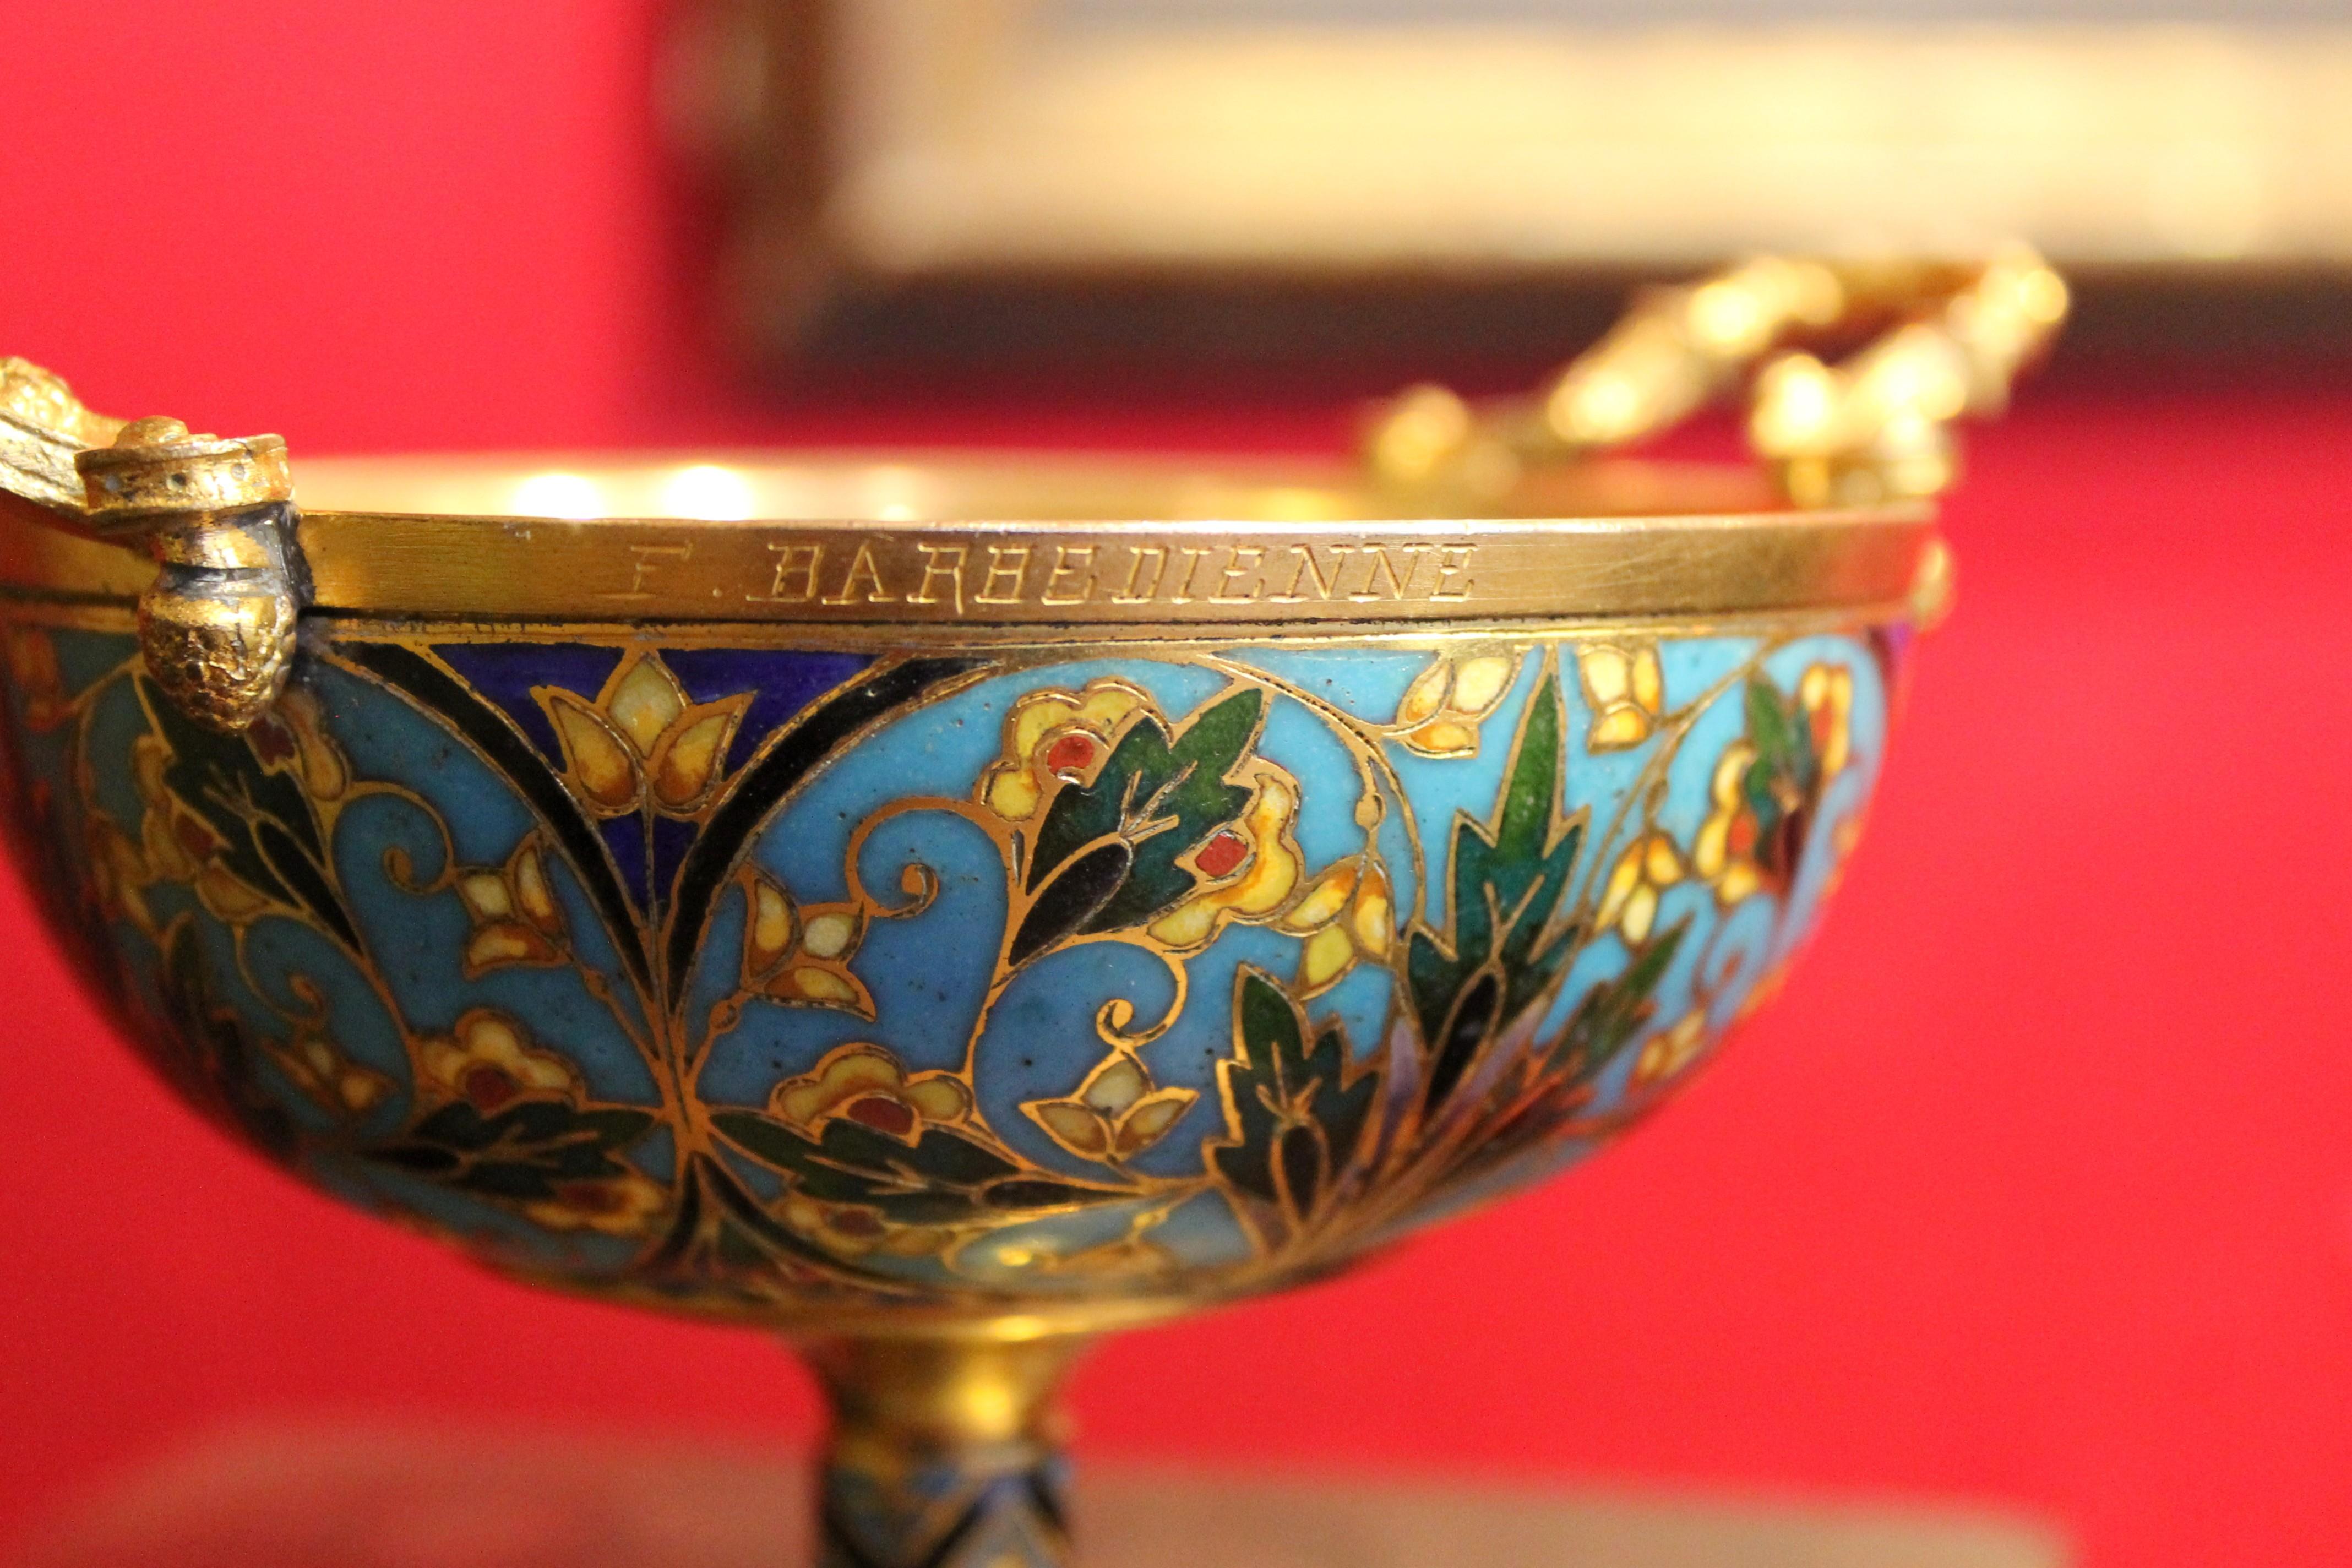 Napoleon III F. Barbedienne, 19th Century French Gilt Bronze and Cloisonnè Enamel Tazza Cup For Sale